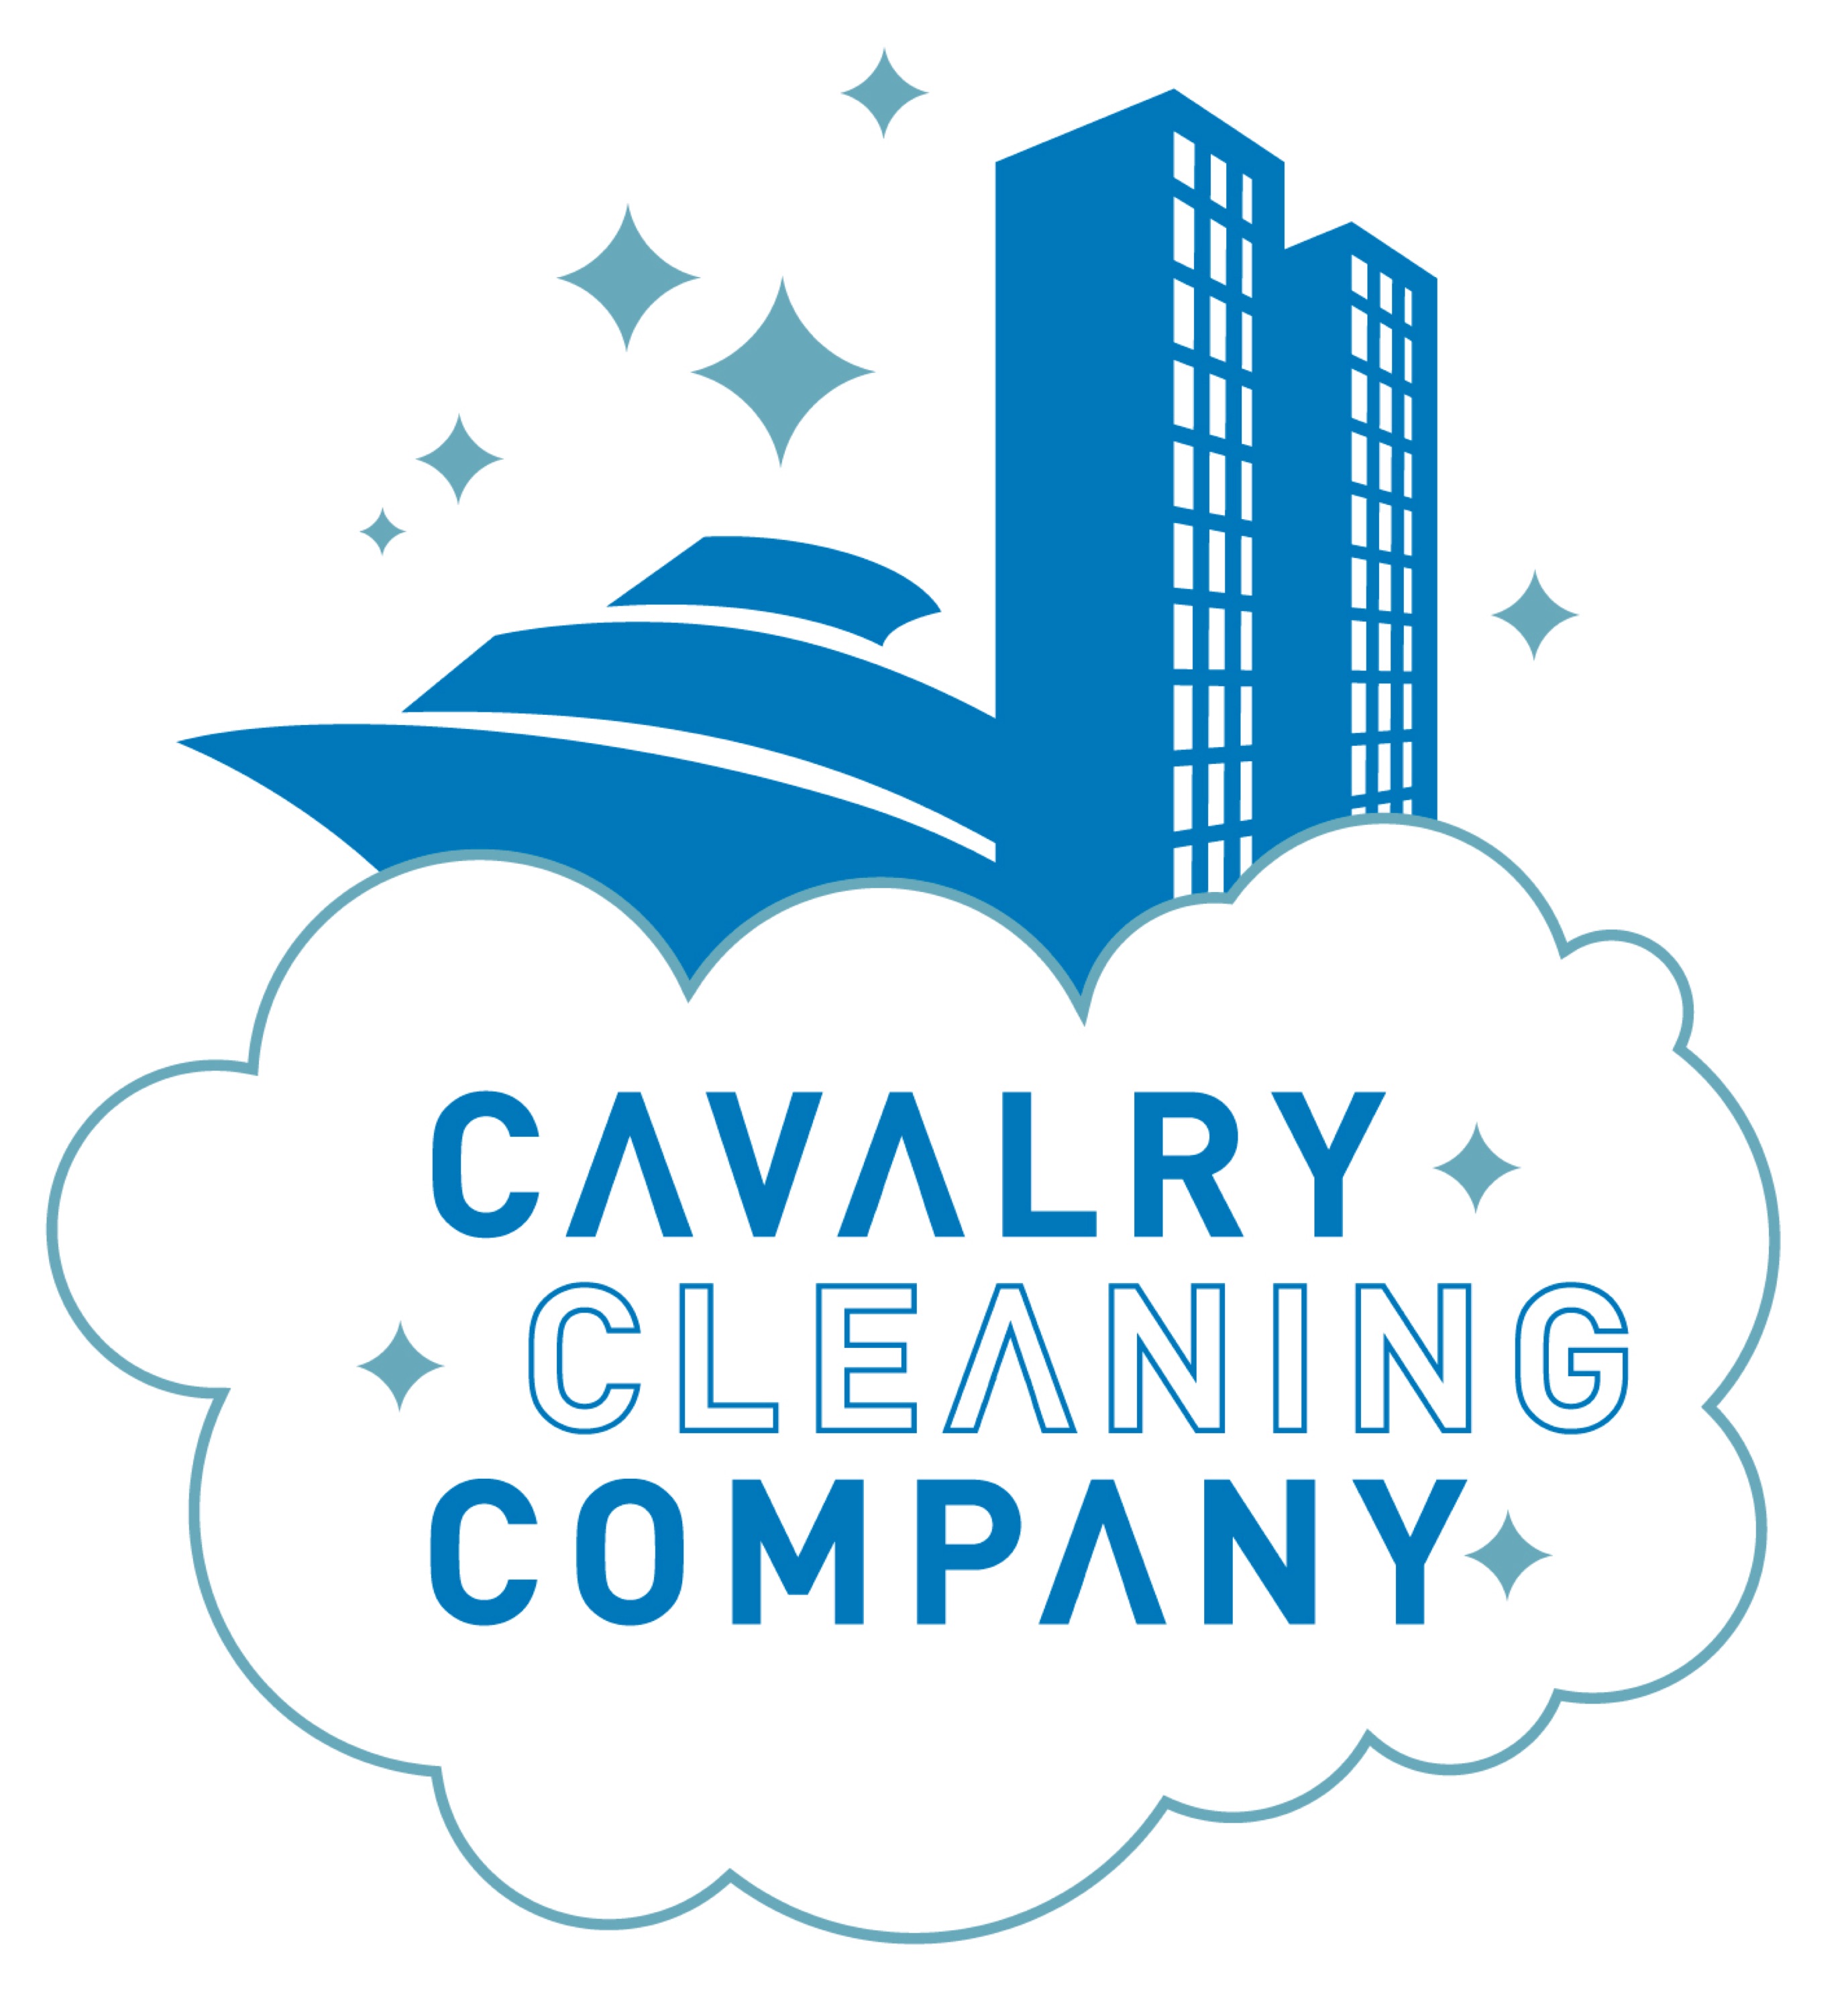 The Cavalry Cleaning Company Logo